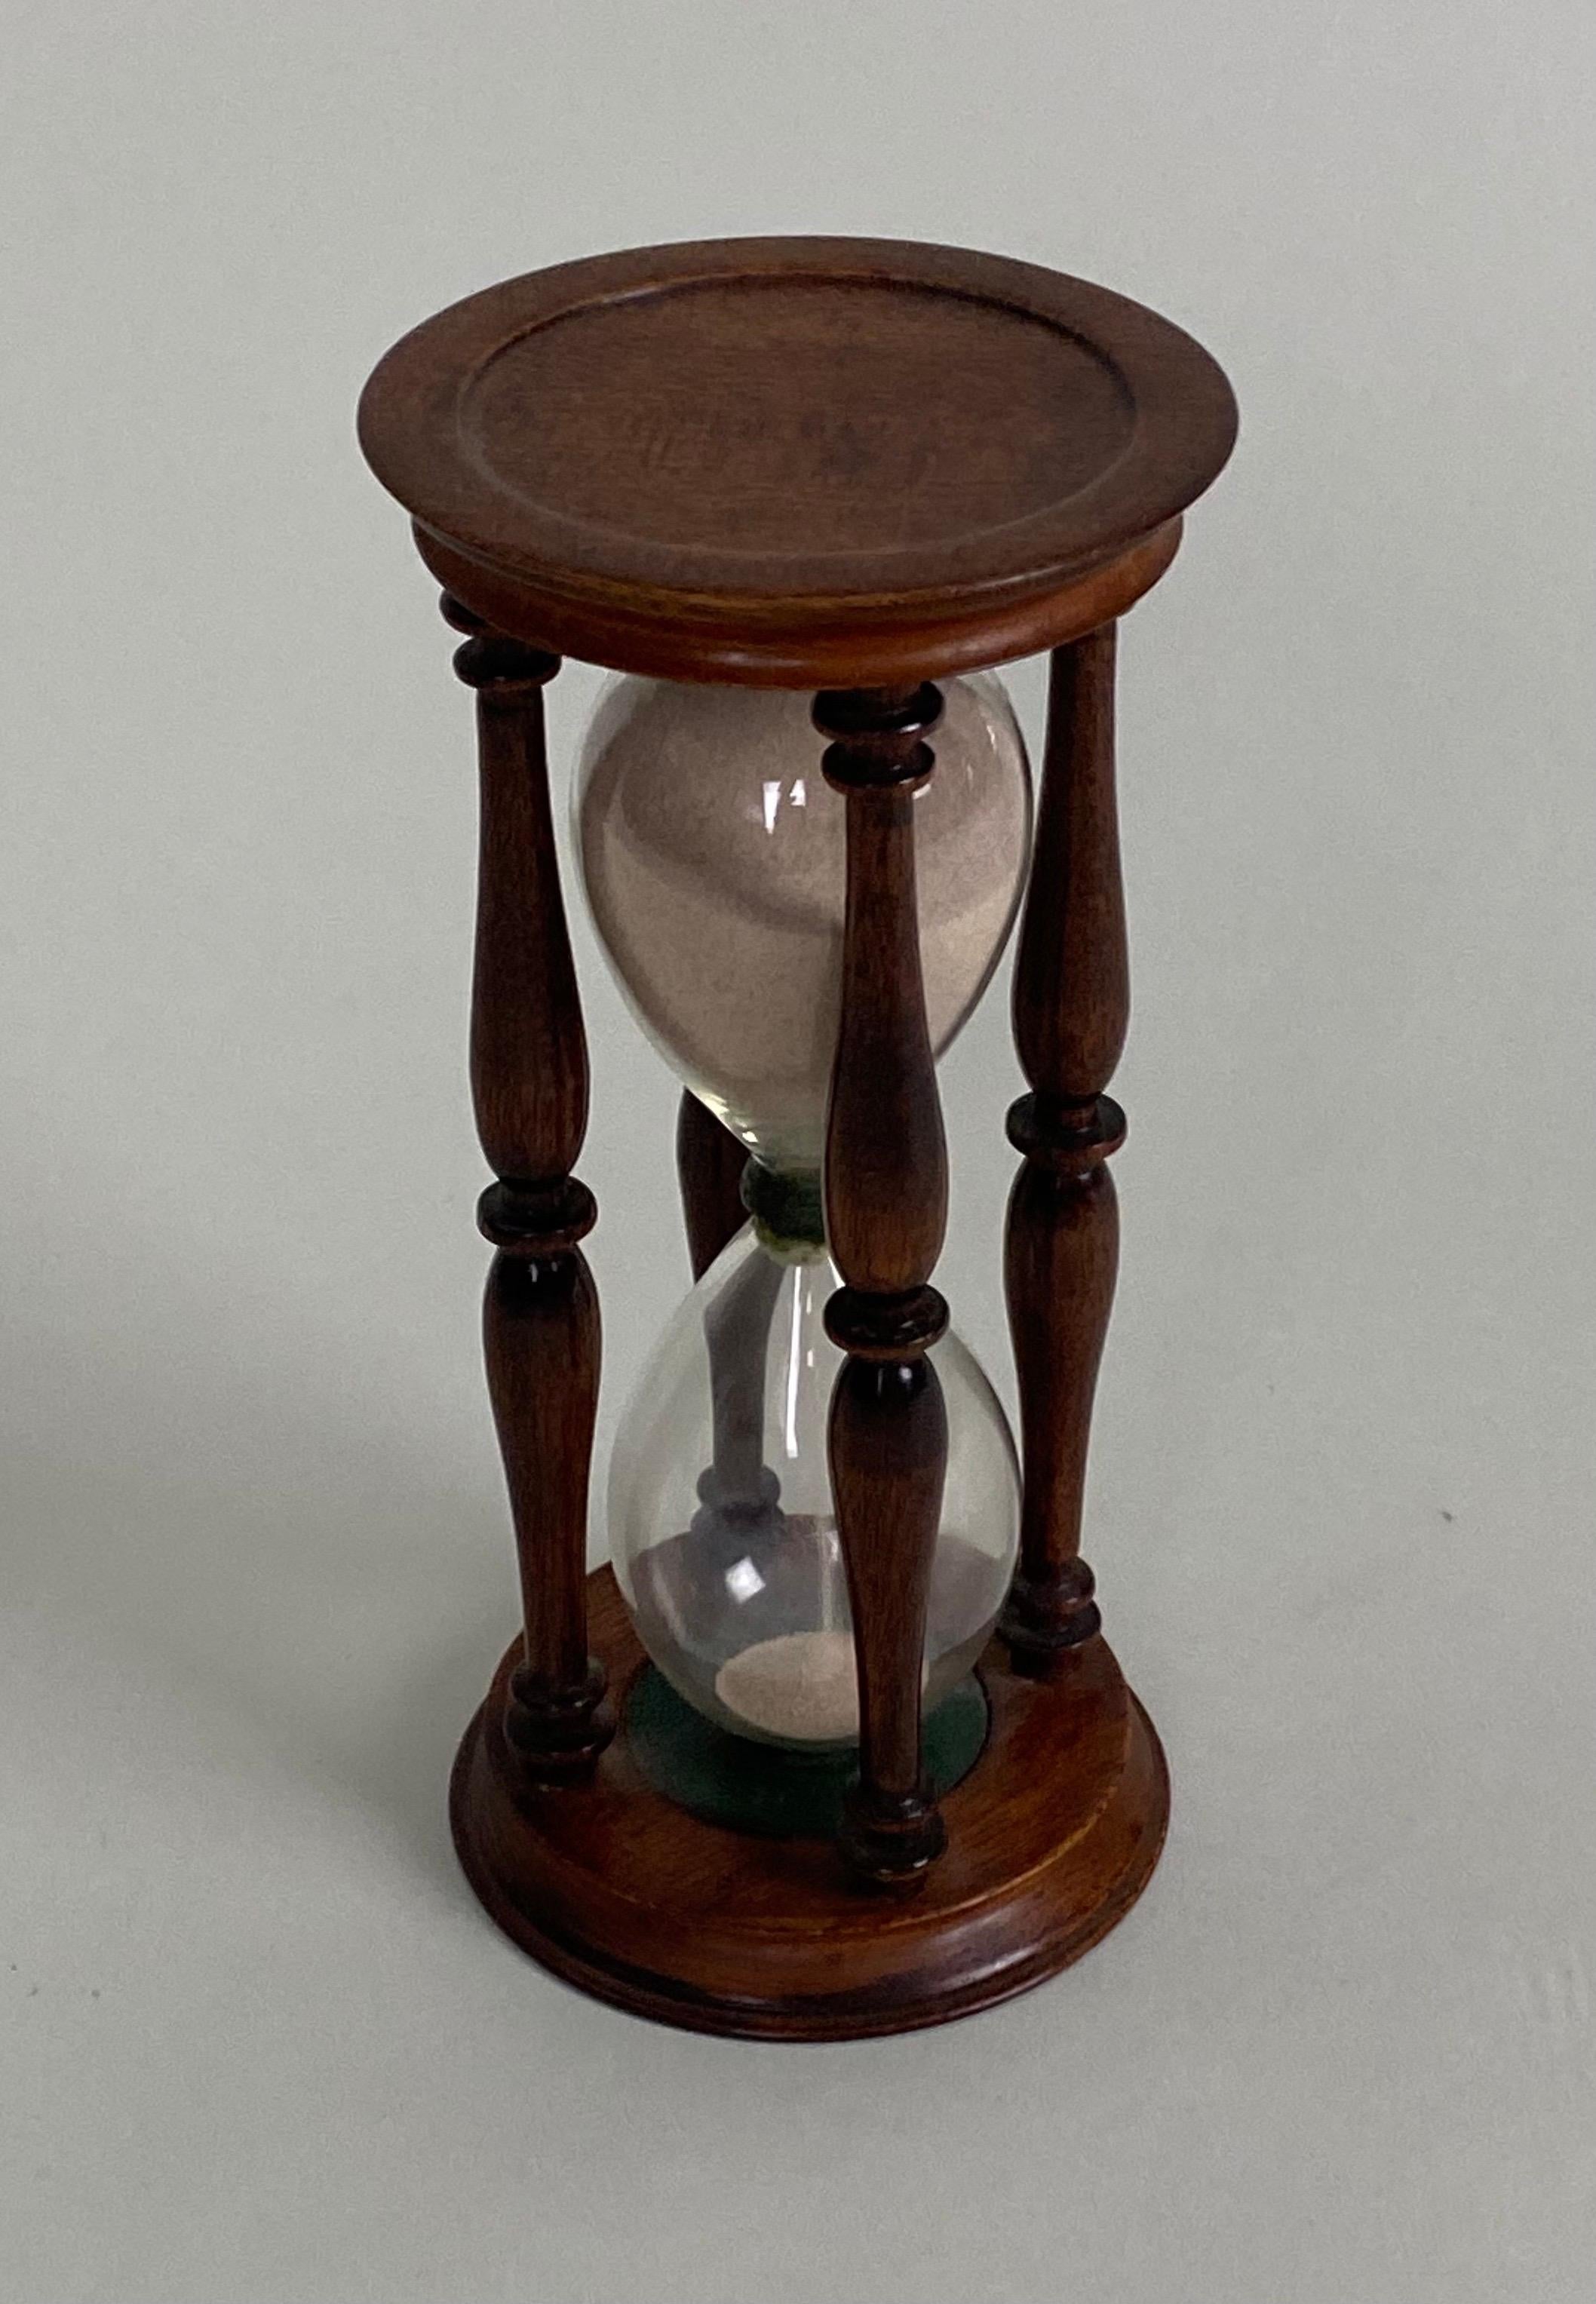 Victorian Hourglass within 4 turned wood balusters and top and bottom caps.